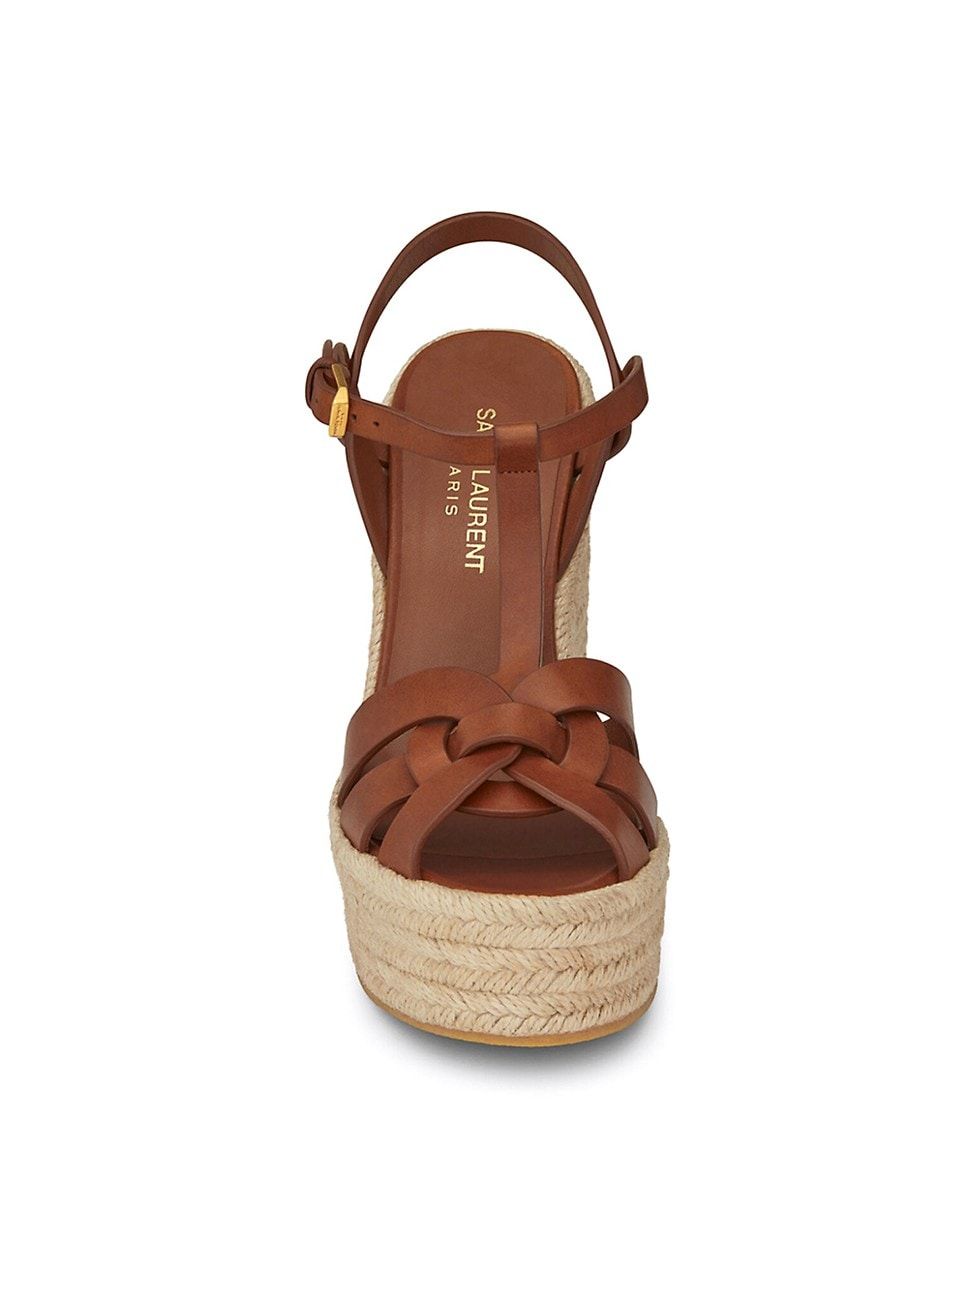 Tribute Leather Espadrille Wedge Sandals | Saks Fifth Avenue